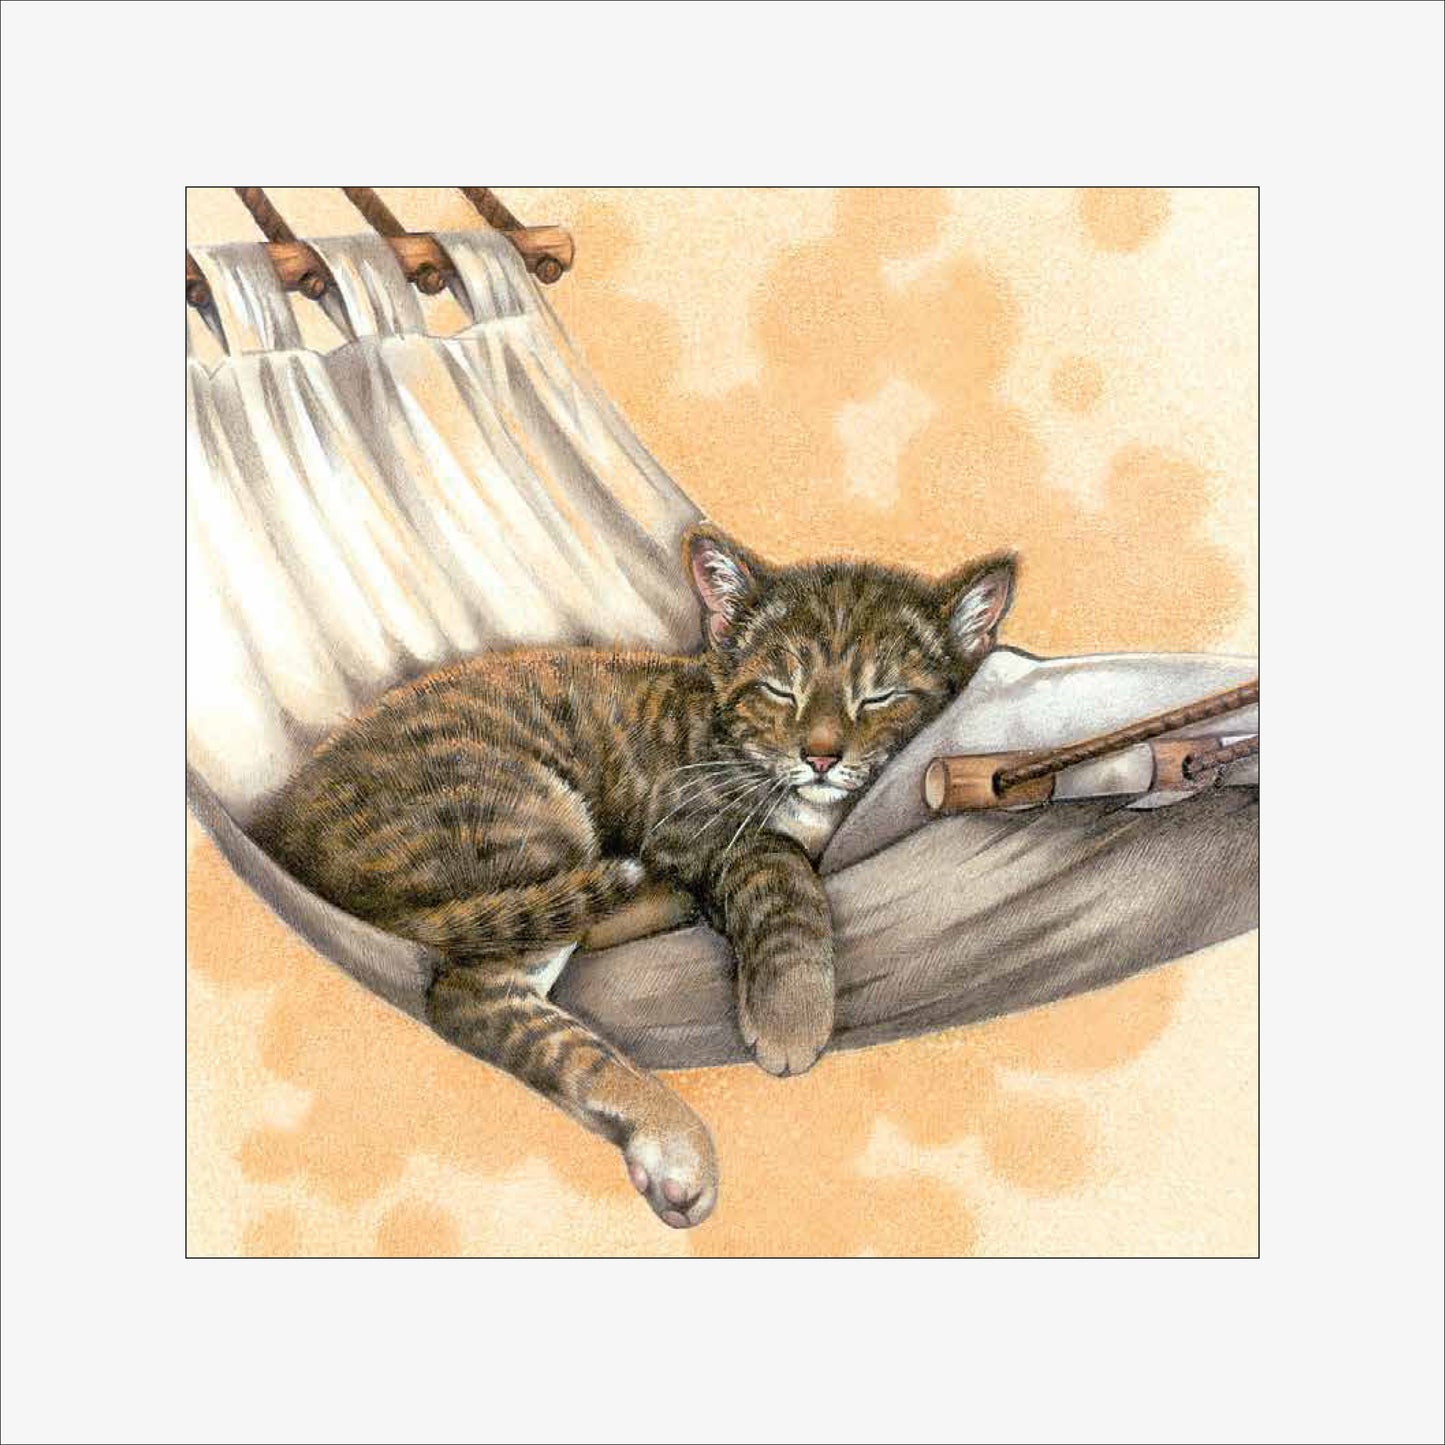 Reproduction "Cat in the Hammock".